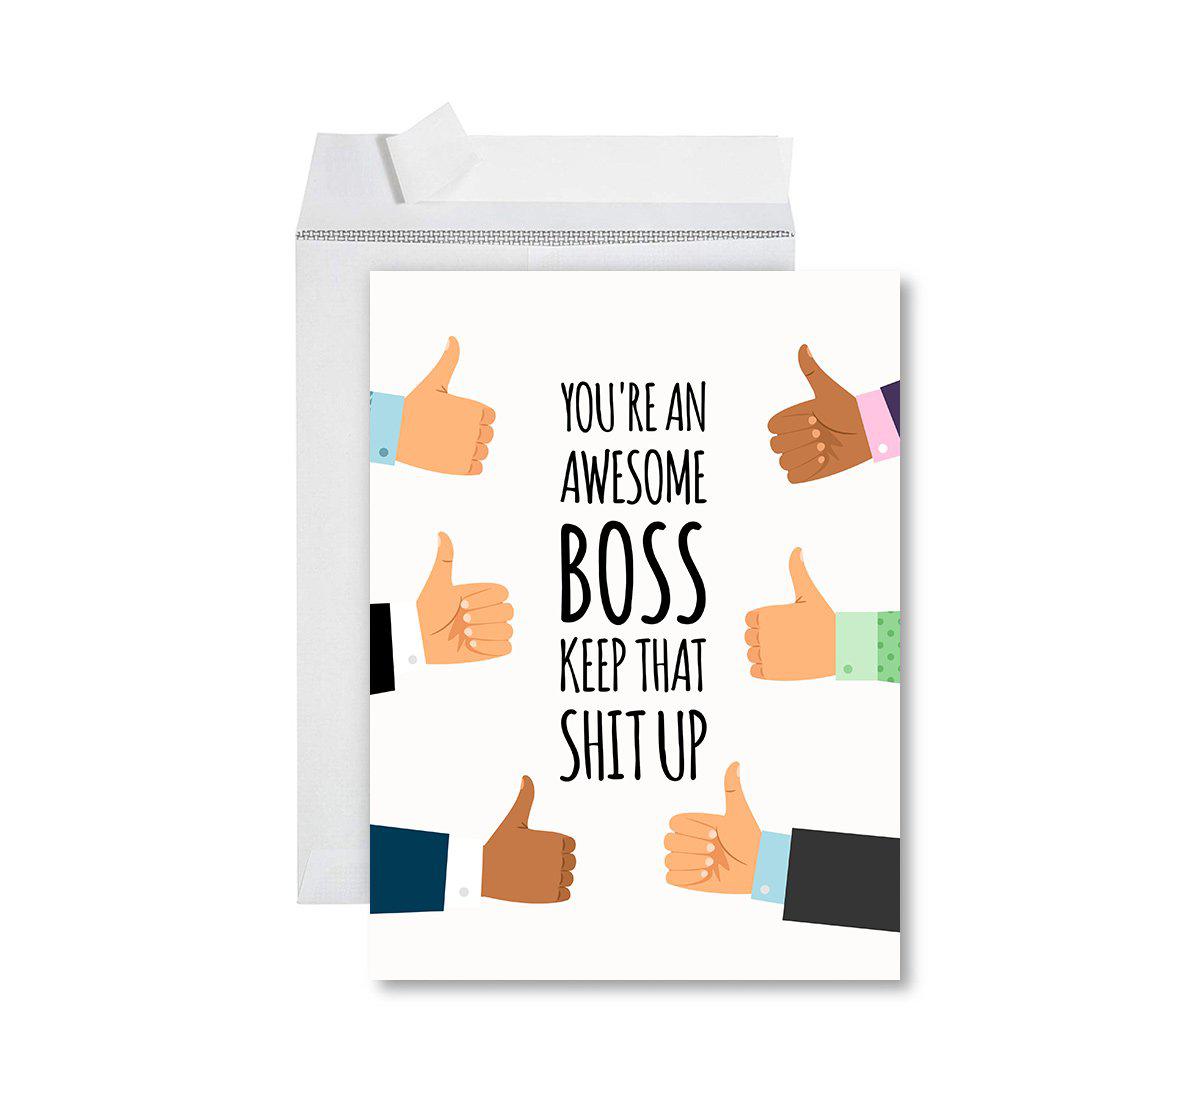 funny boss day cards